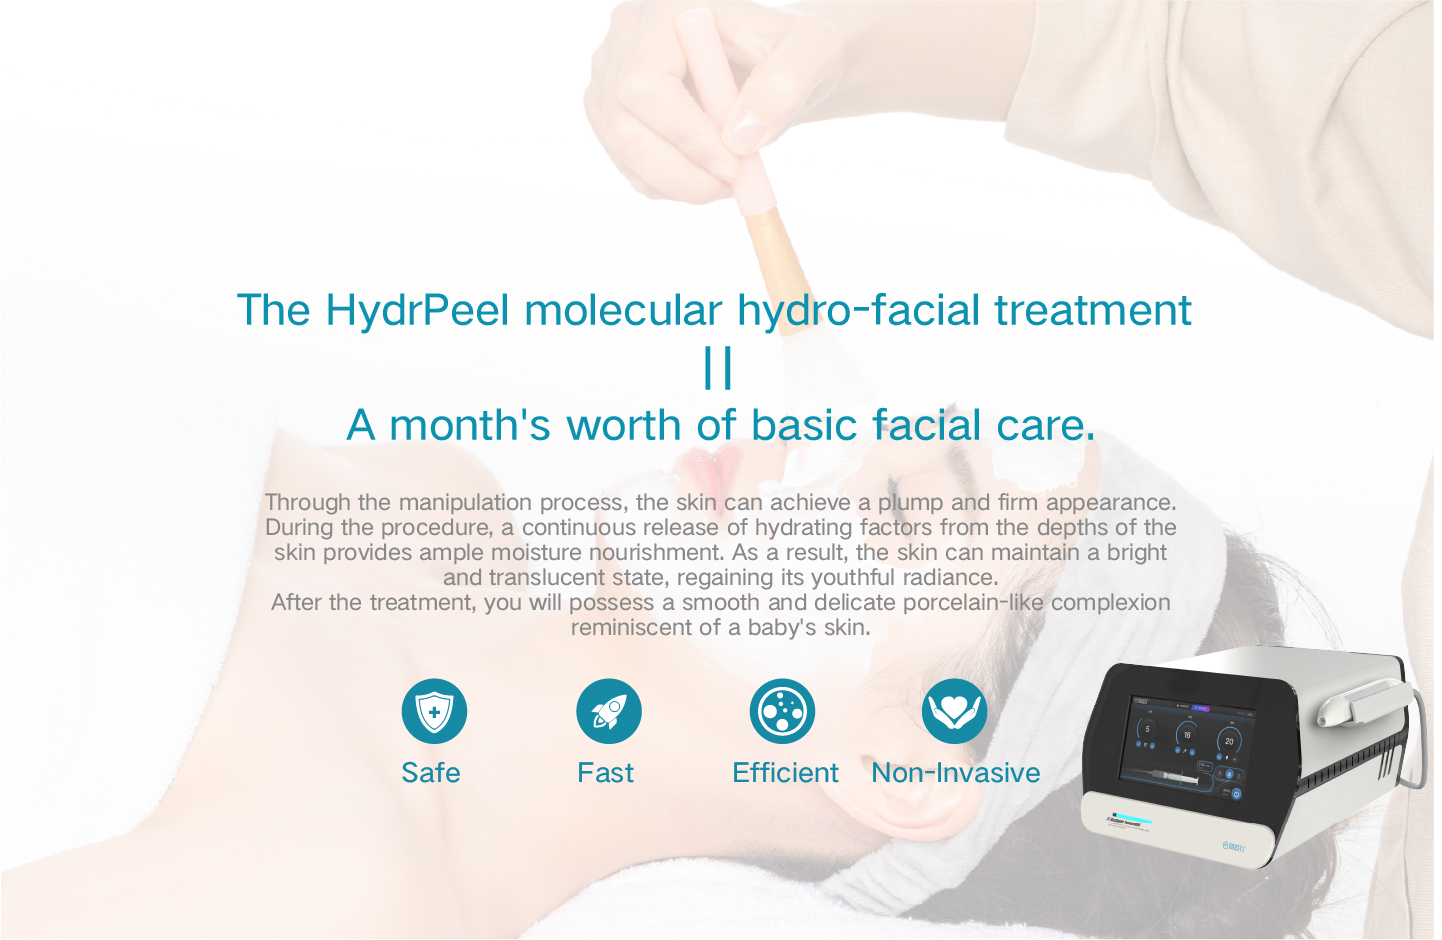 The HydrPeel molecular hydro-facial treatment is equivalent to a month's worth of basic facial care